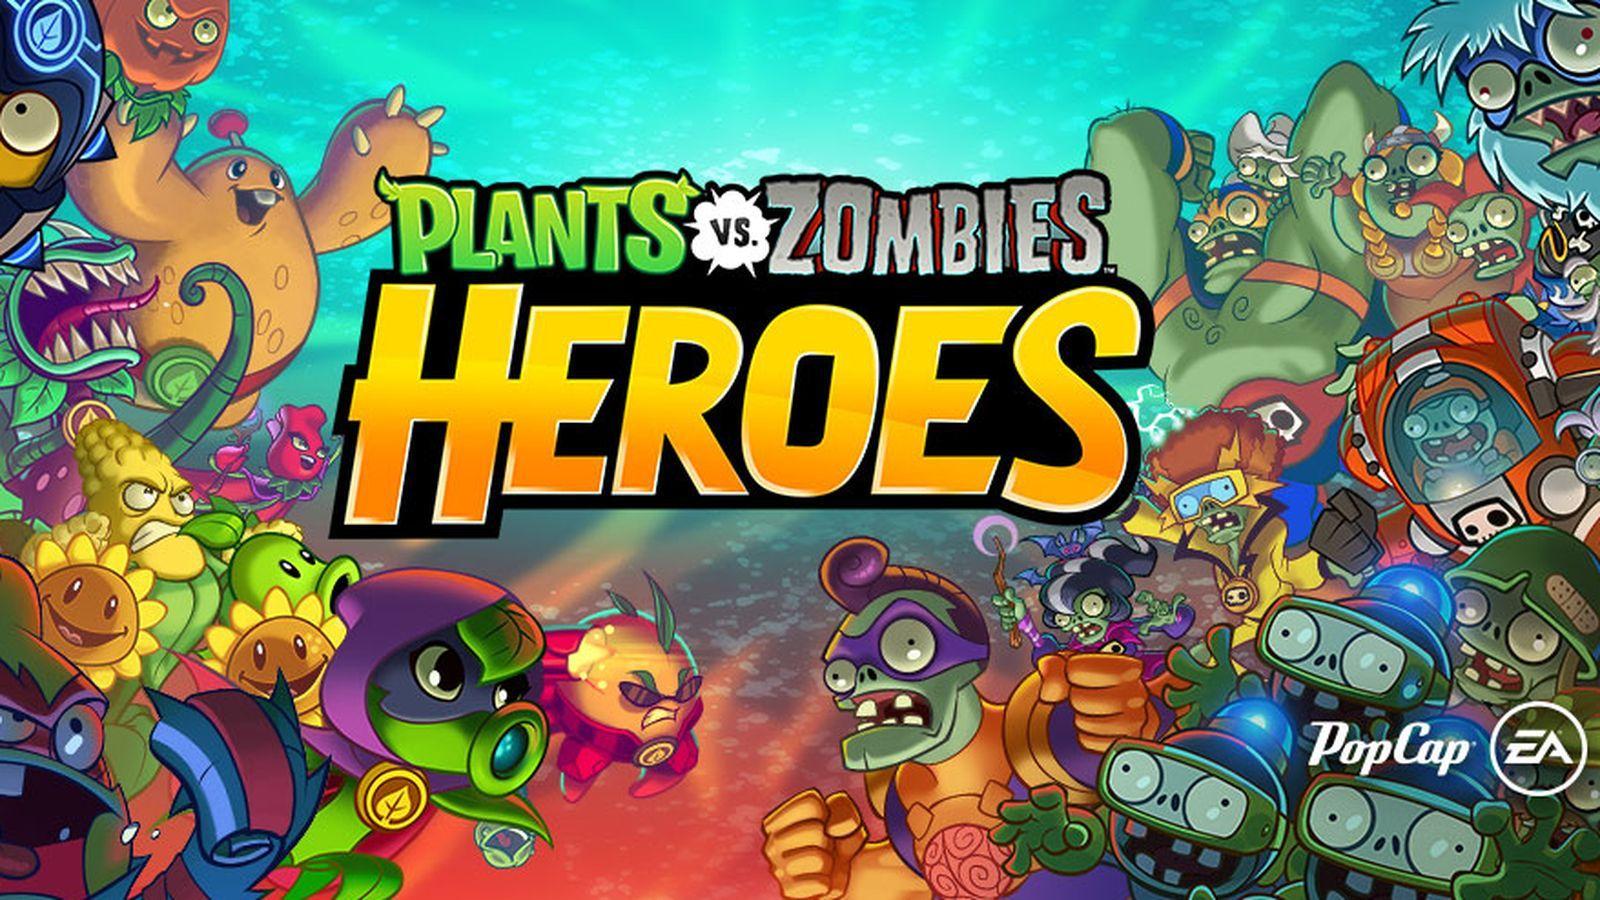 Plants vs Zombies Heroes' Guide: Deck Building Strategy And Other